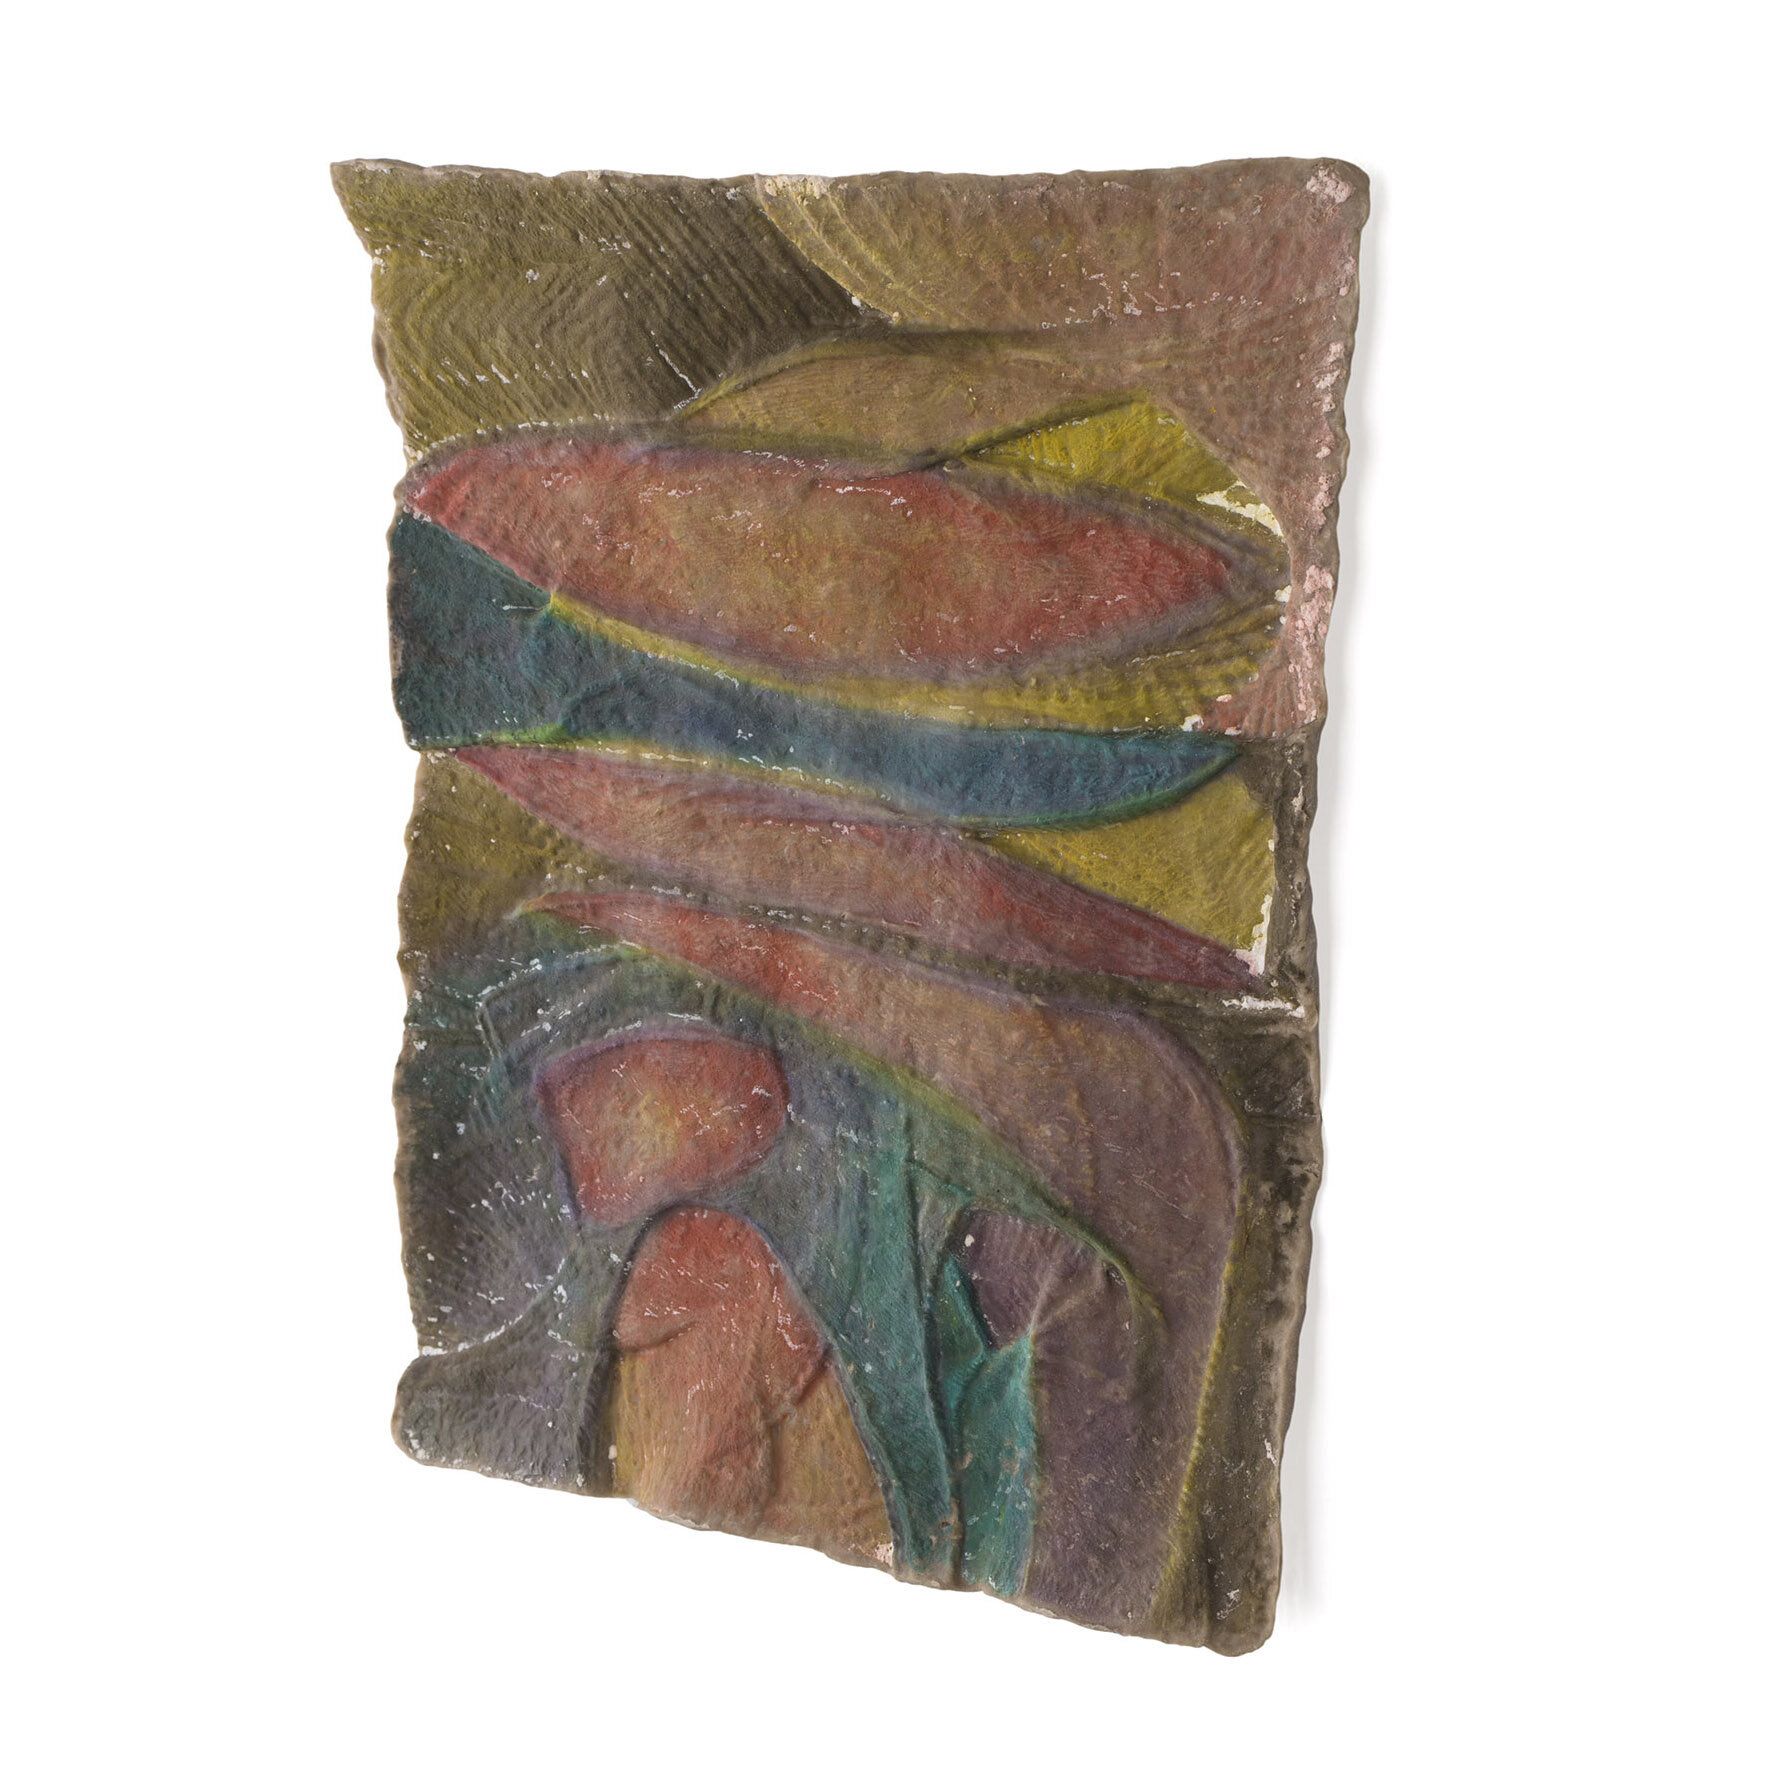  11 x 9 inches cast paper pulp with watercolor 